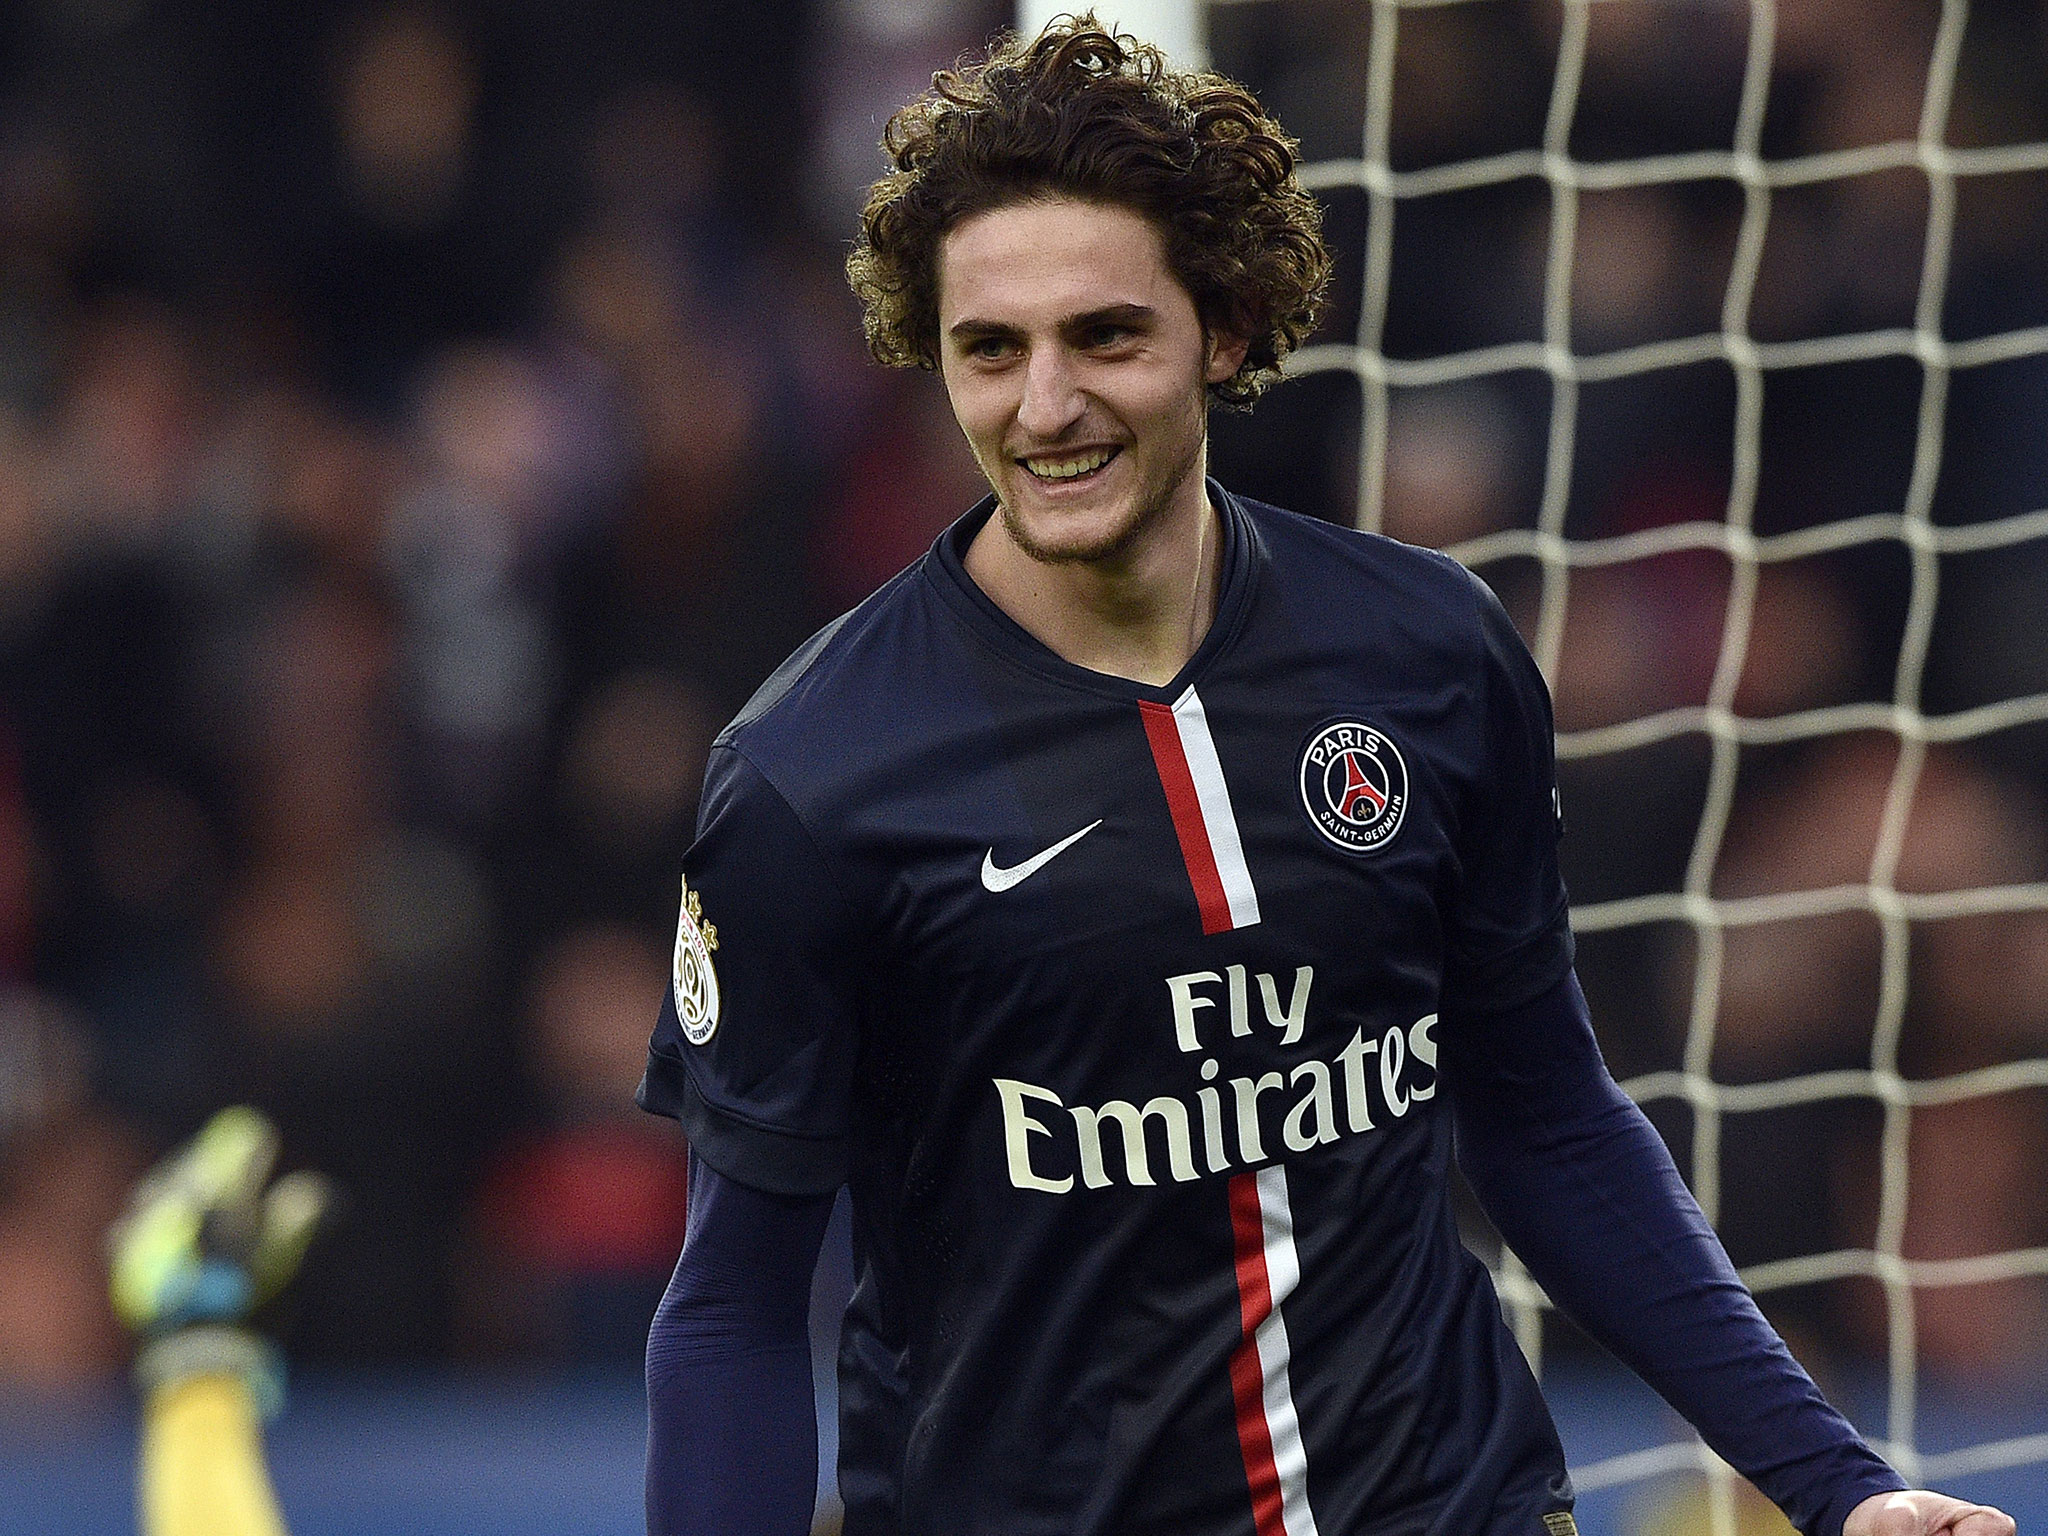 Adrien Rabiot celebrates after scoring for PSG. (Getty Images)